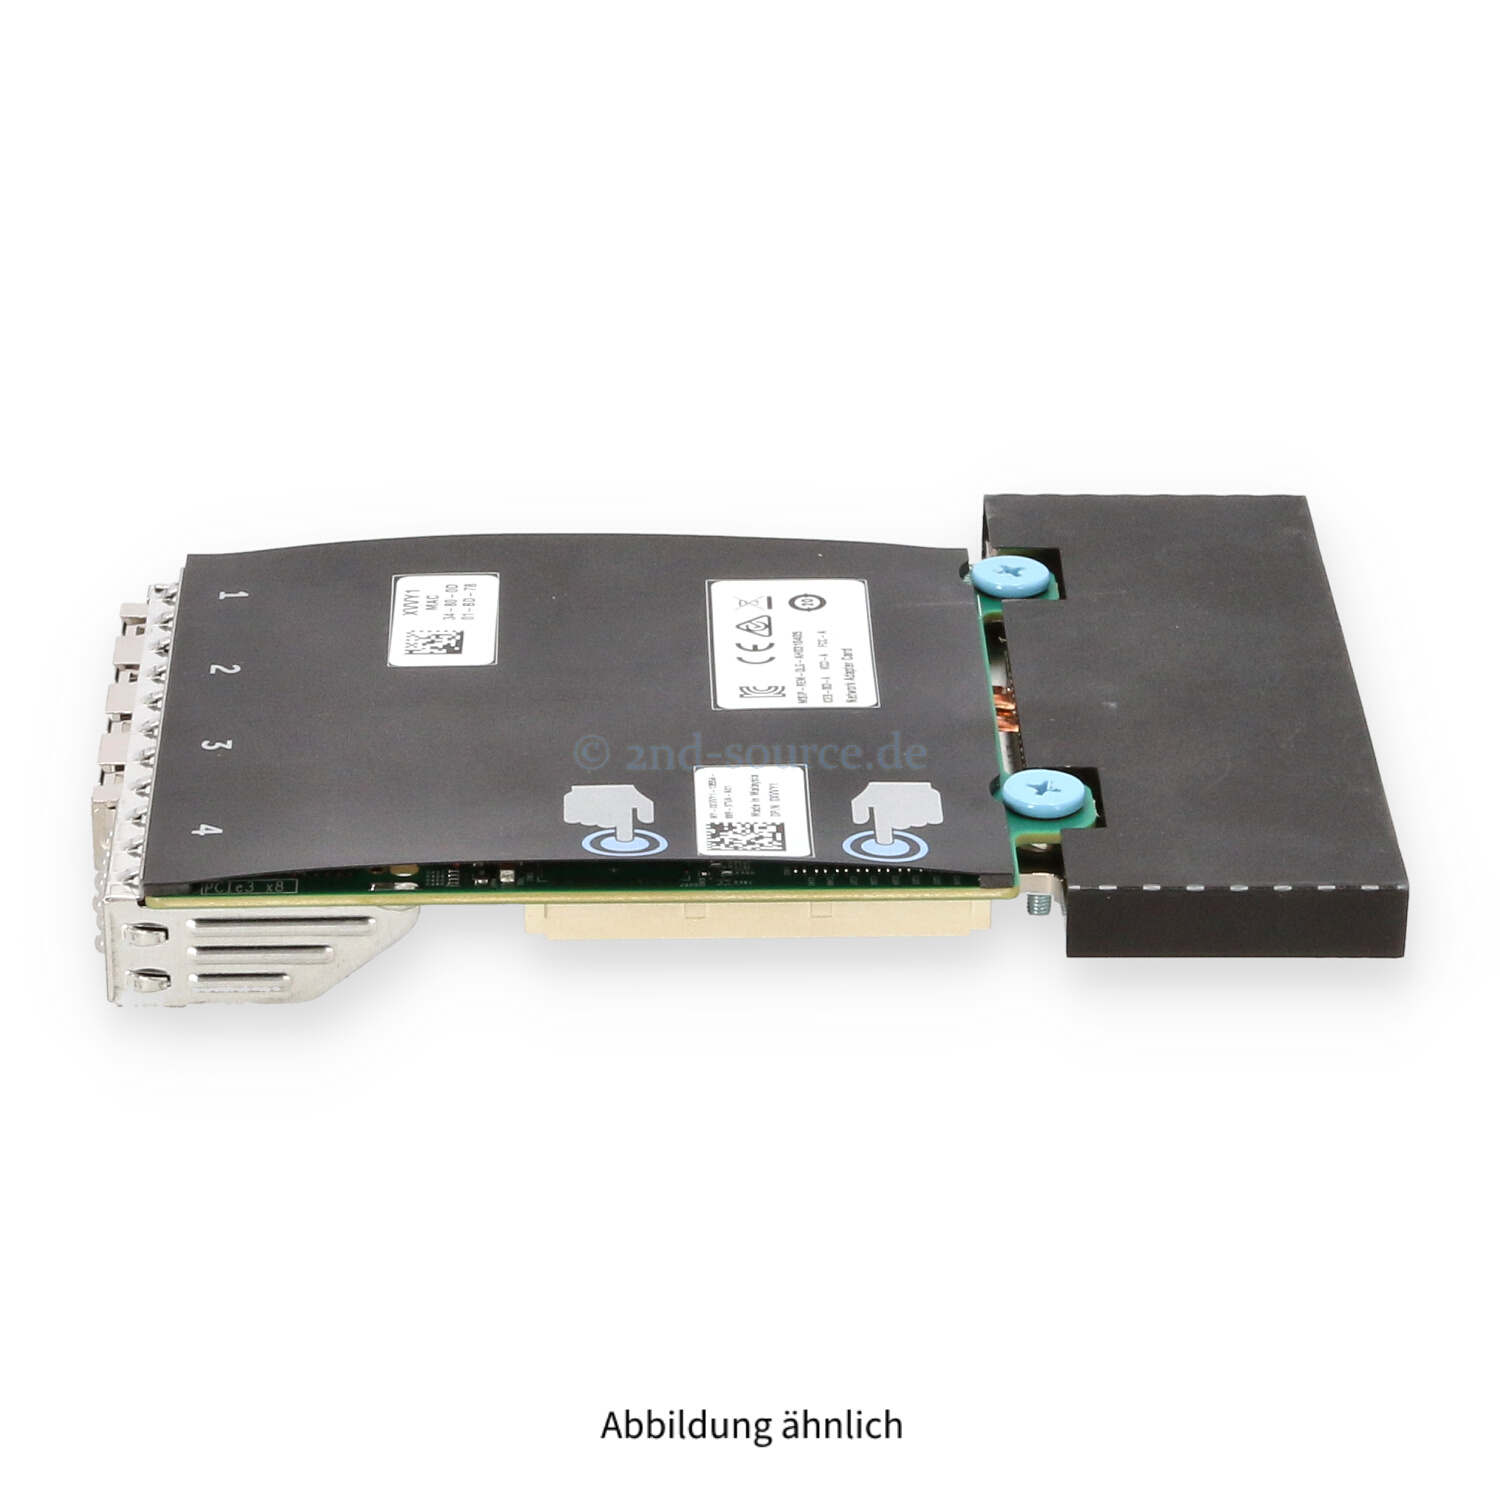 Dell QLogic FastLinQ 41164 4x SFP+ 10GbE Network Daughter Card XVVY1 0XVVY1